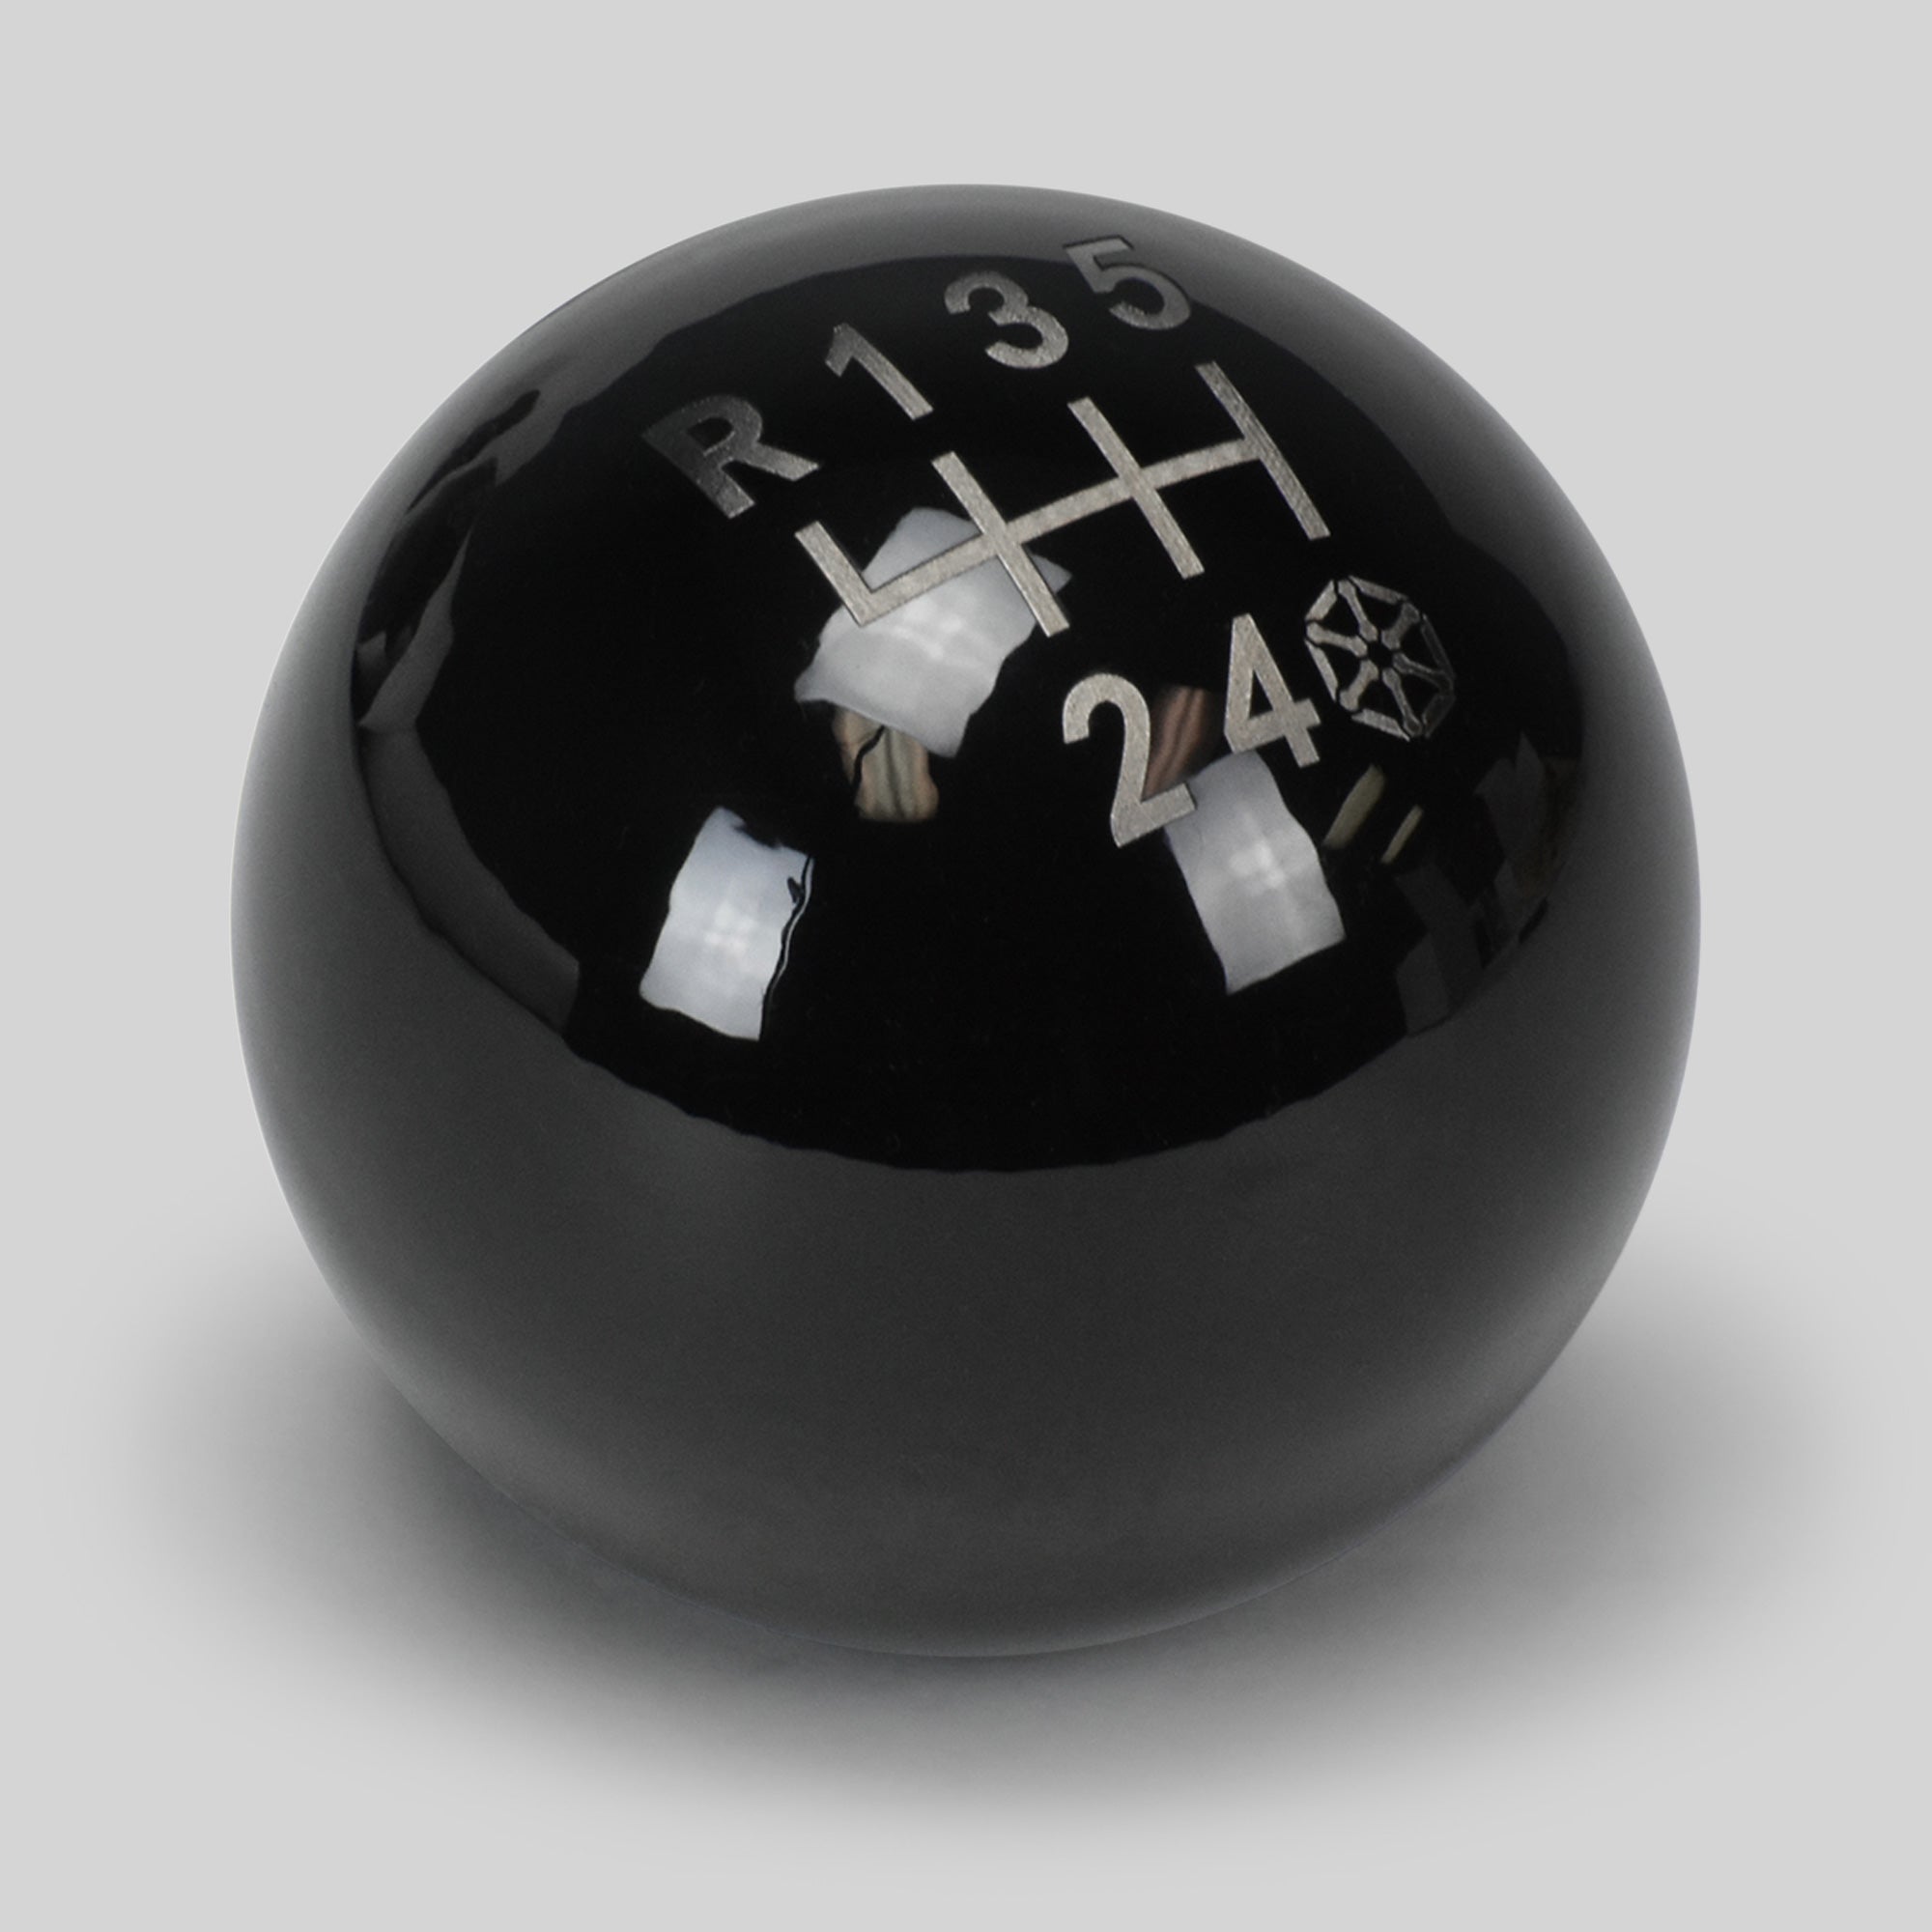 Genuine Shift Knob For Transfer Case And Differential Lock On Land